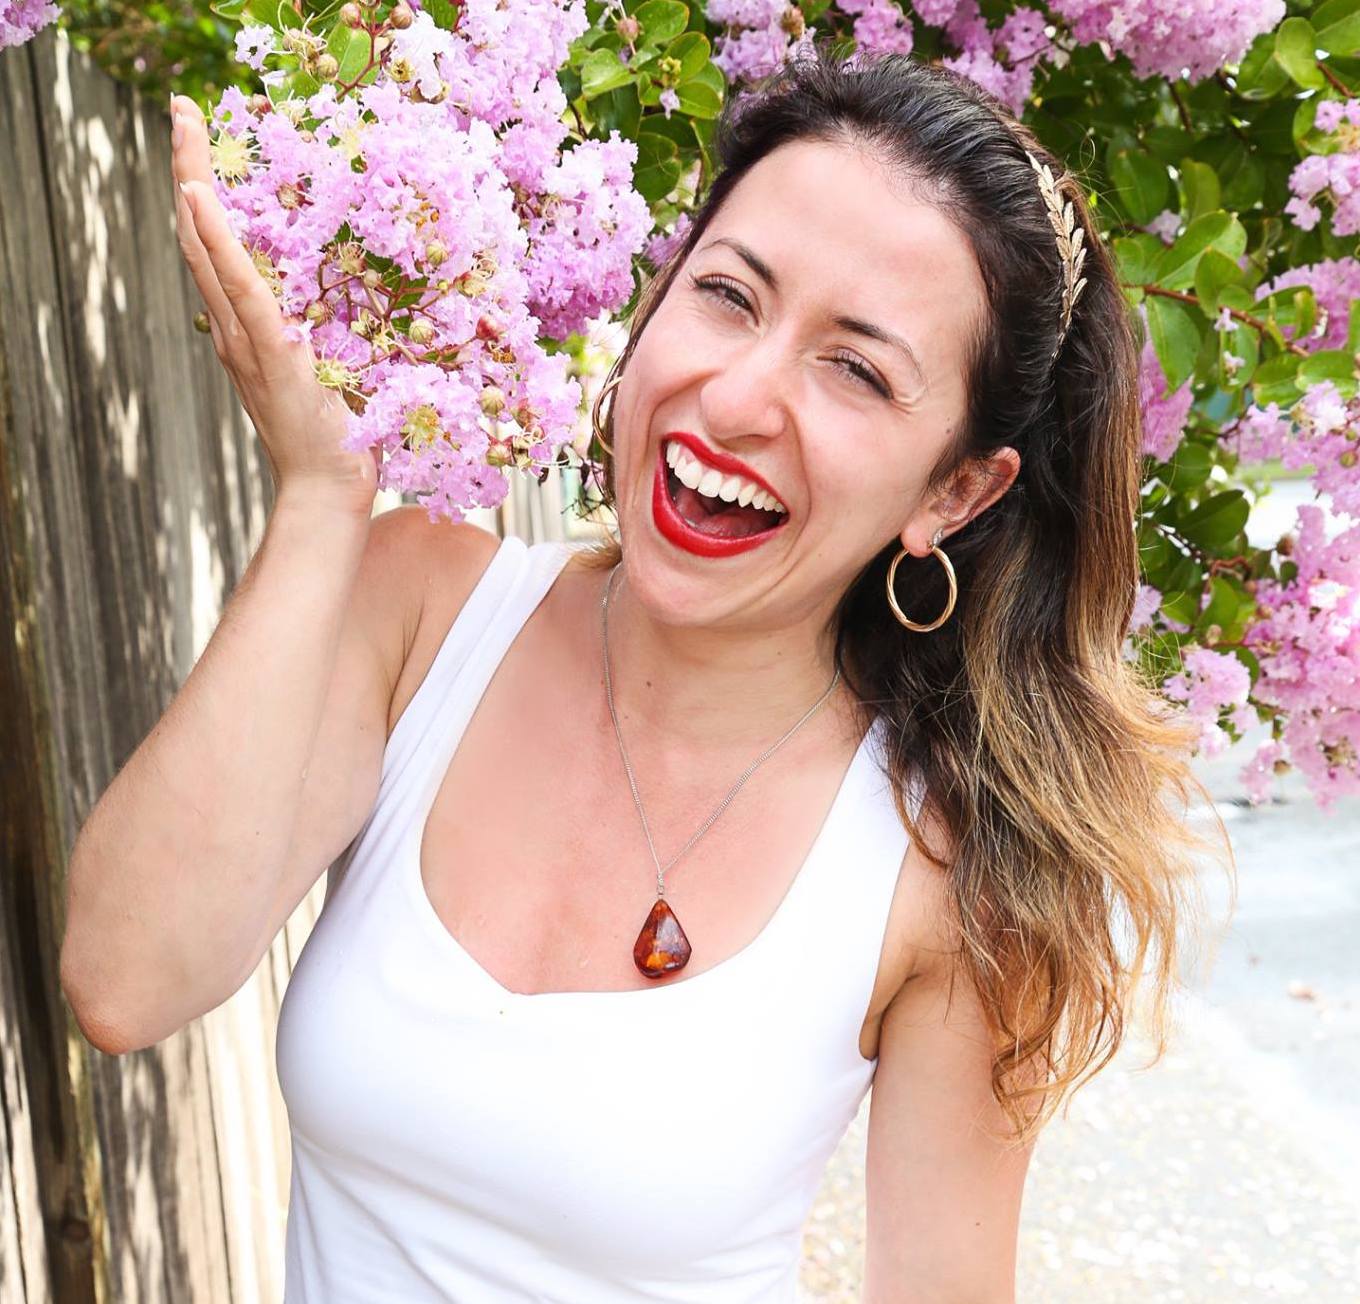 Anna Krjatian wears a white top, red lipstick, holding a pink flower in one hand, standing next to a fence and laughing.